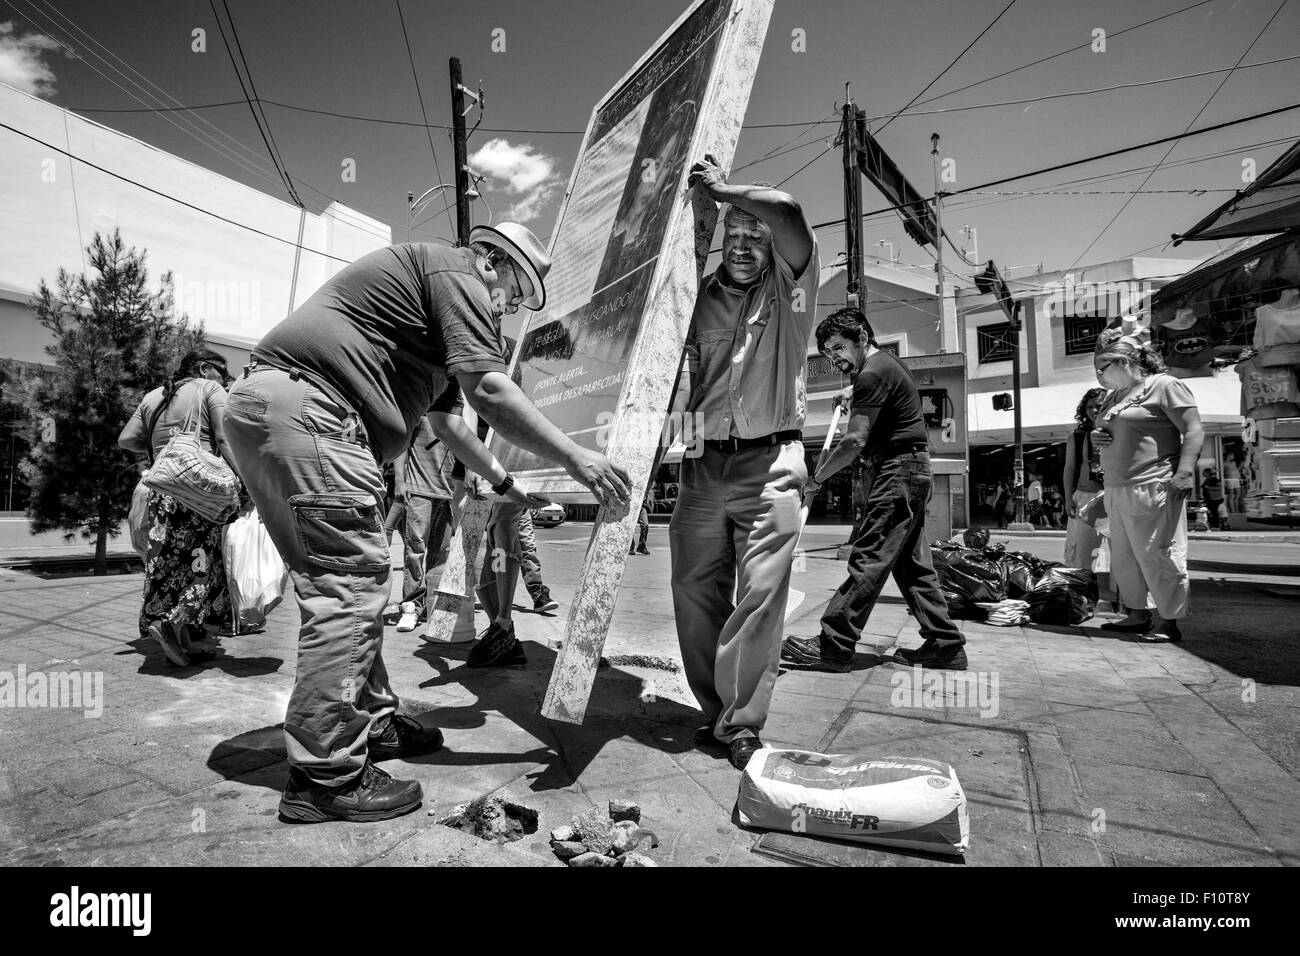 May 19, 2015 - Ciudad Juarez, CHIHUAHUA, MEXICO - With a little help from his friends and supporters, Jose Luis Castillo places a permanent plaque in downtown Juarez that commemorates the life of his daughter Esmeralda Castillo Rincon and pleads for information about her disappearance. Ciudad Juarez, Mexico. May 19, 2015. (Credit Image: © Gabriel Romero via ZUMA Wire) Stock Photo